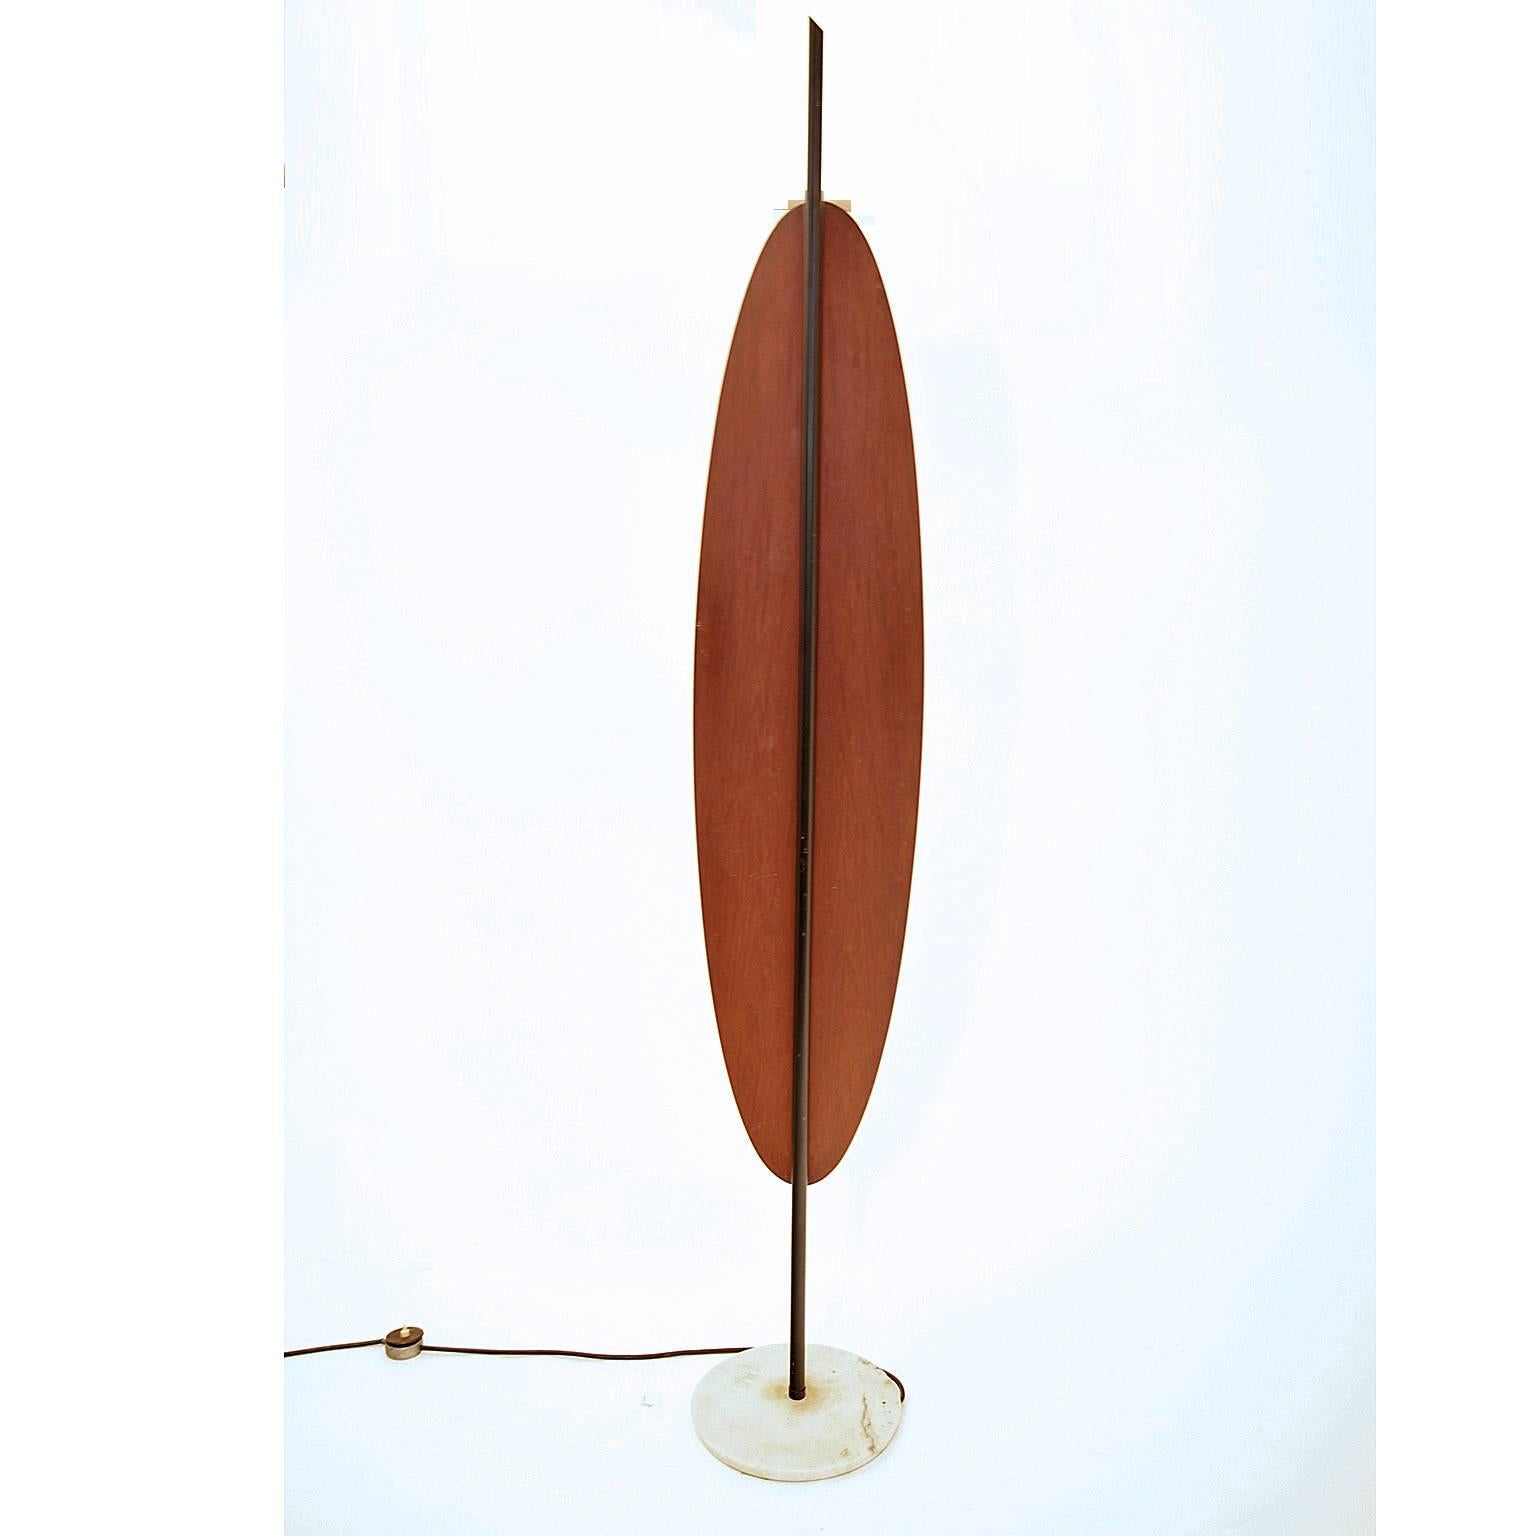 Floor light by Reggiani circa 1960 on a round white marble disk. The oval mahogany structure with three white opaque glass bodies is mounted on a blackend iron rod. The end is slanted. 

See: L'Art Ménager, p. 350.